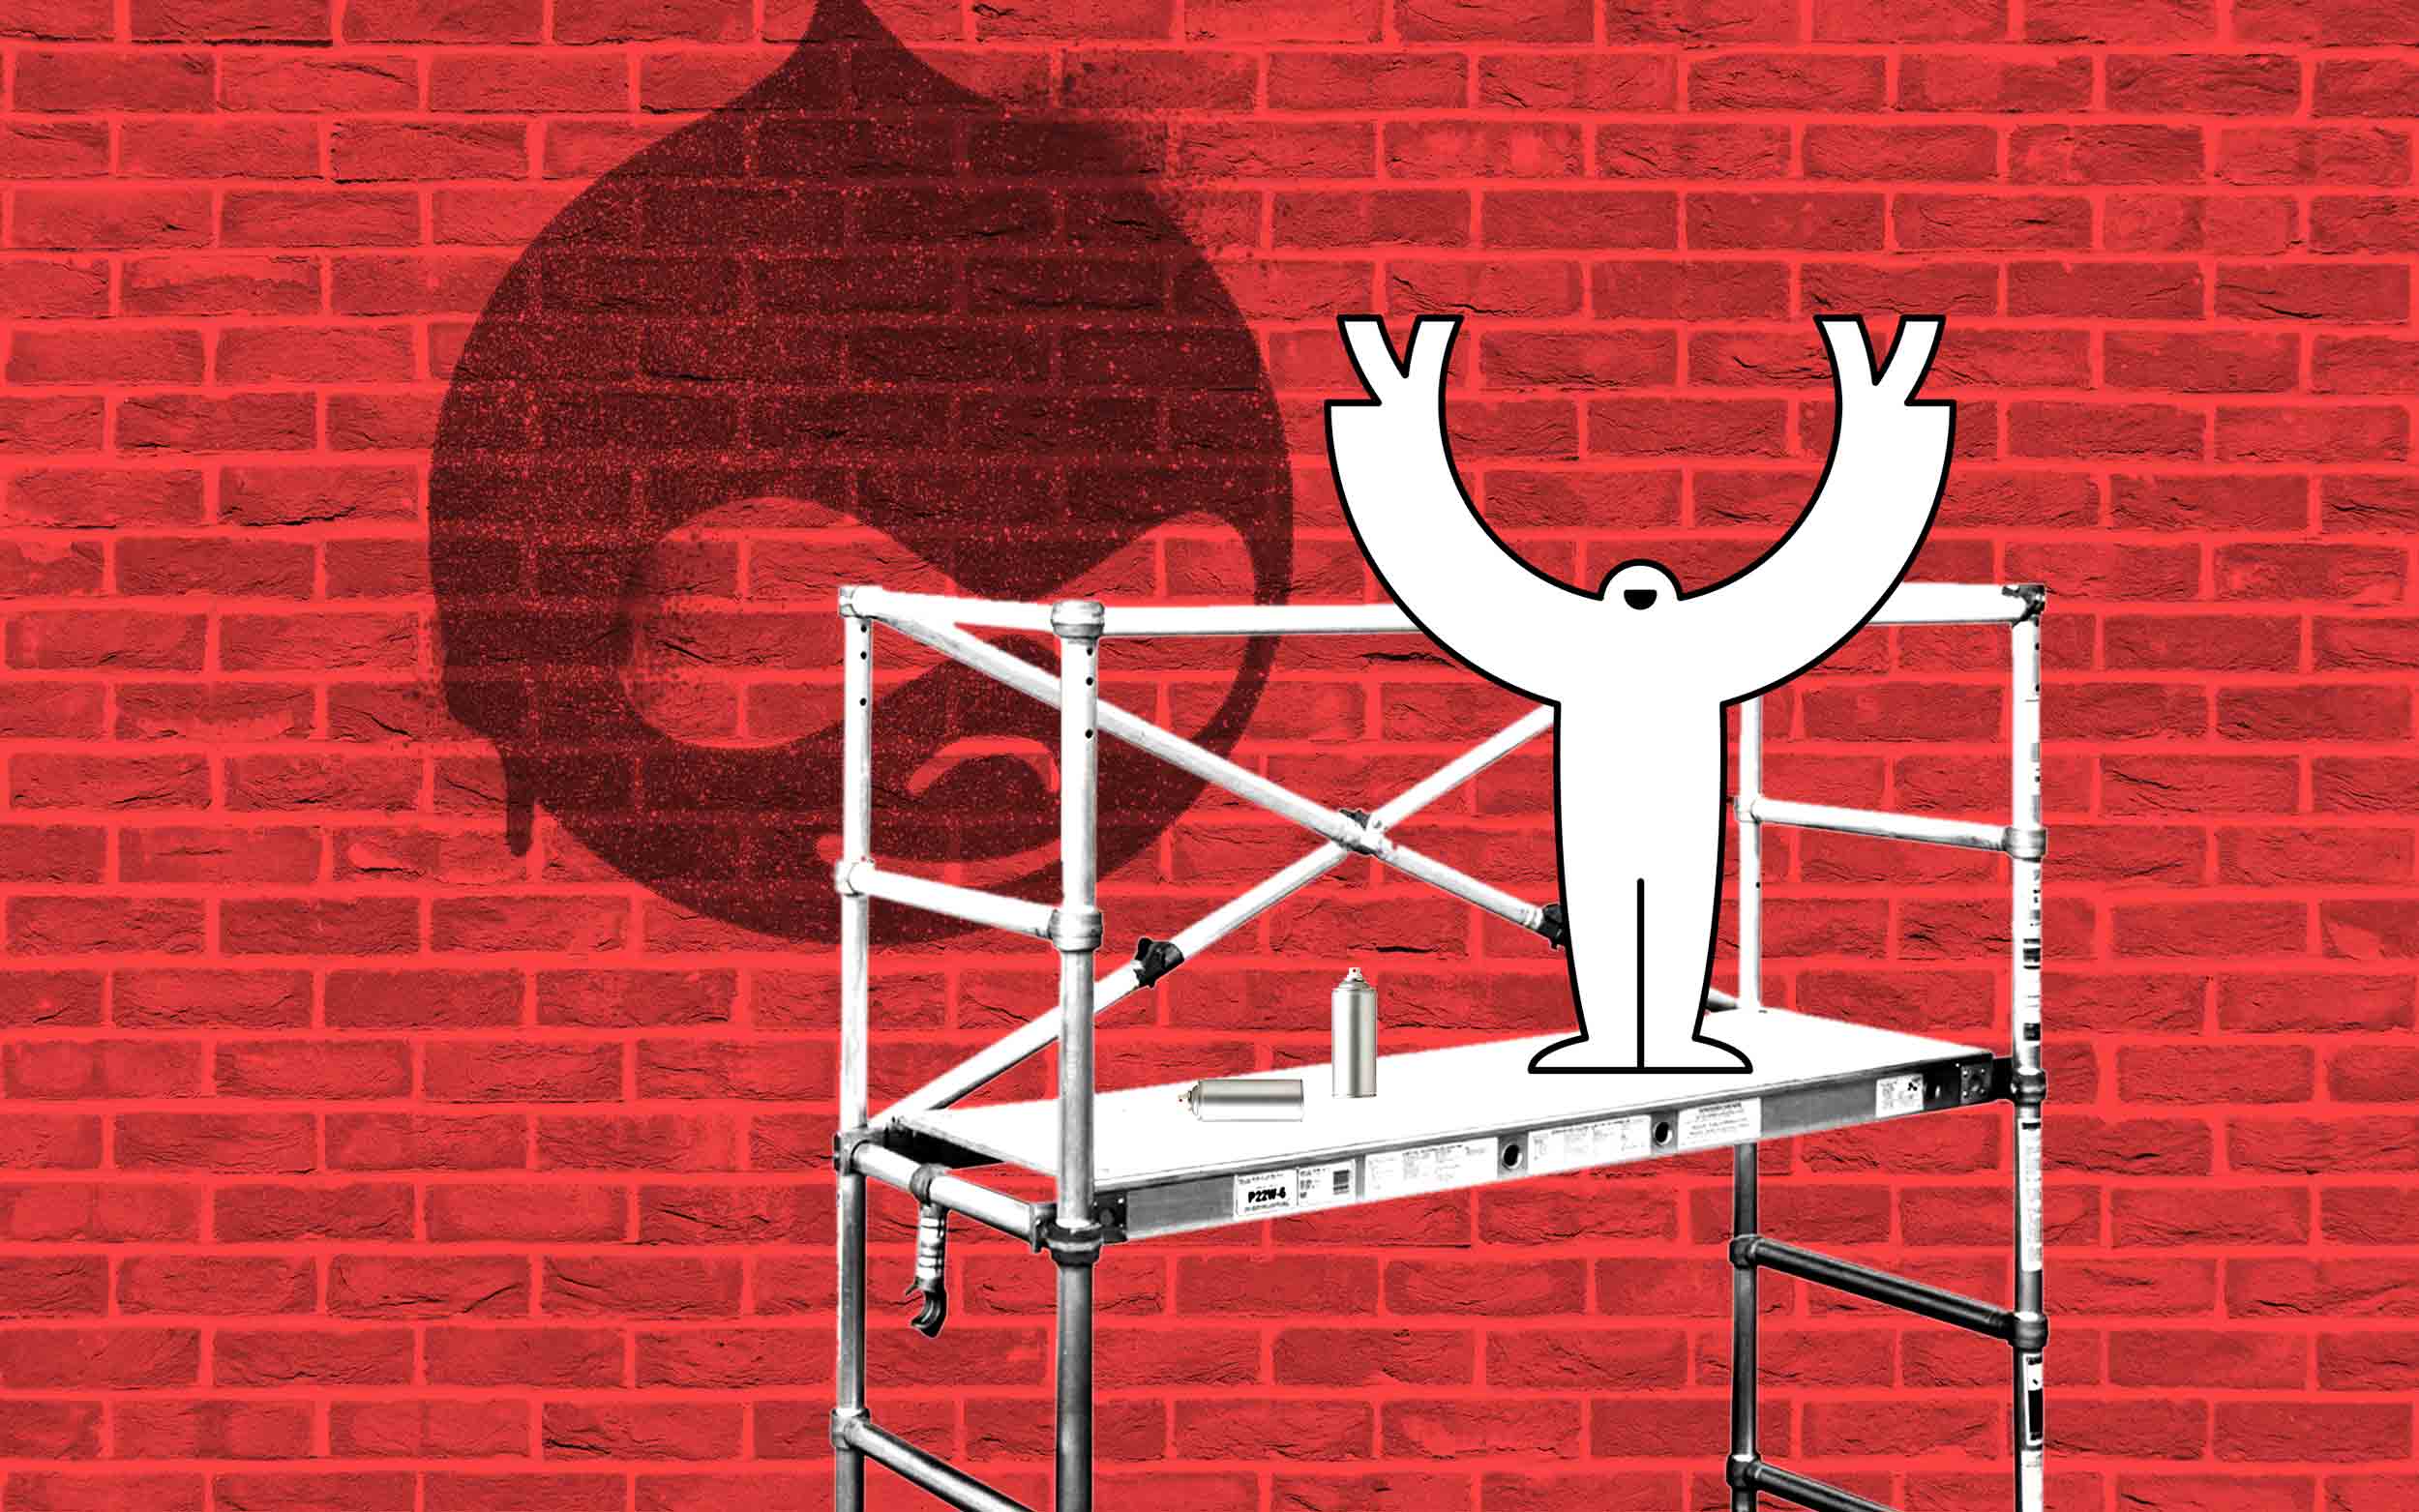 A yeti standing on scaffolding in front of a brick wall with the Drupal logo spray painted on it.